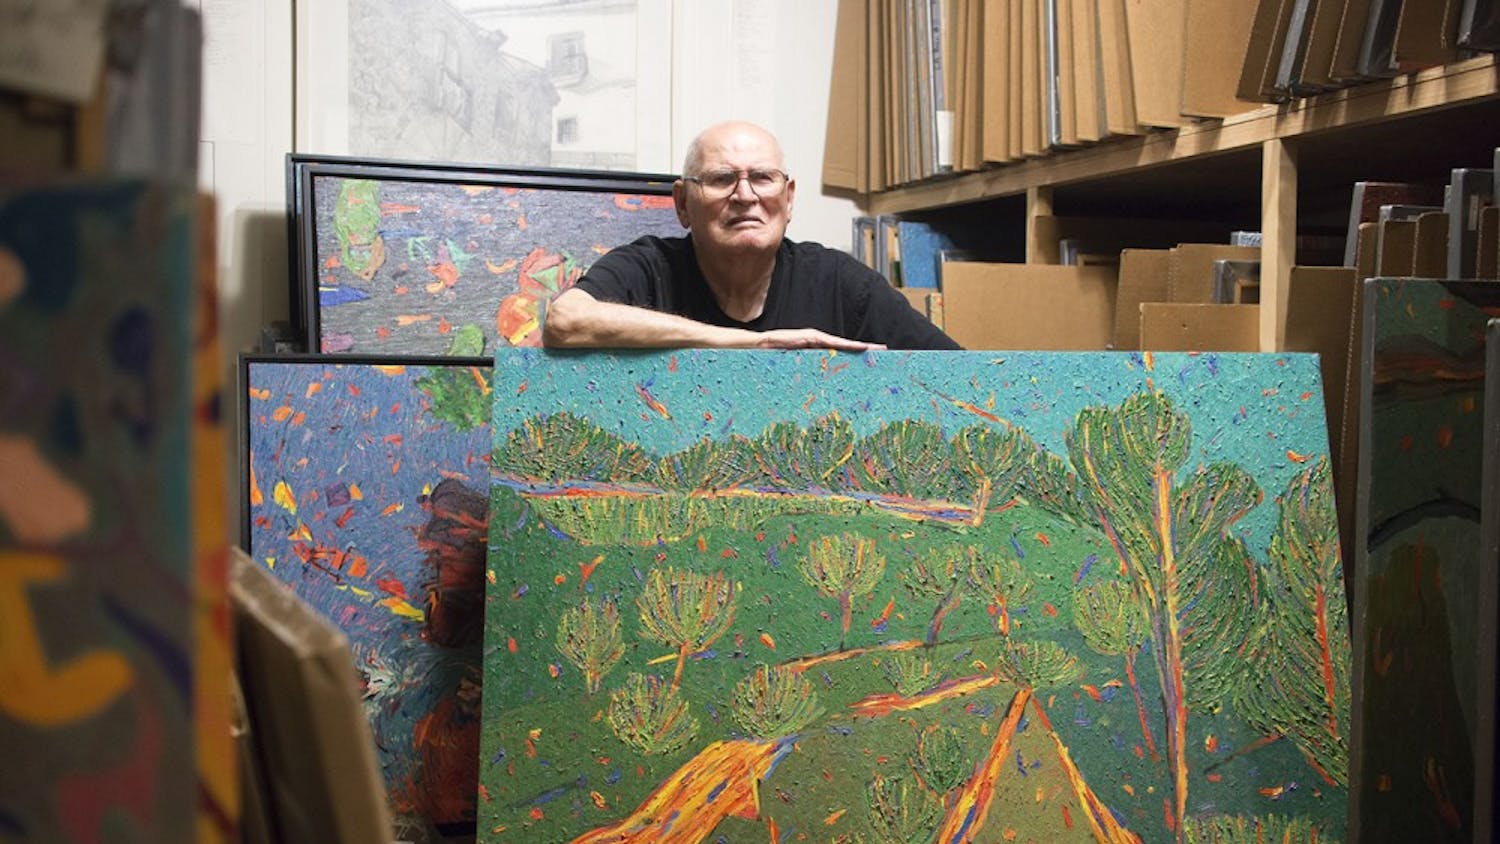 Marvin Saltzman poses with his artwork in his studio, located in Chapel Hill on July 22nd. A small portion of Saltzman's thousands of pieces is currently on display in the Eno Gallery in Hillsboro. 

"I draw from nature, and then I paint about nature."
"Bad teachers train, good teachers open doors."